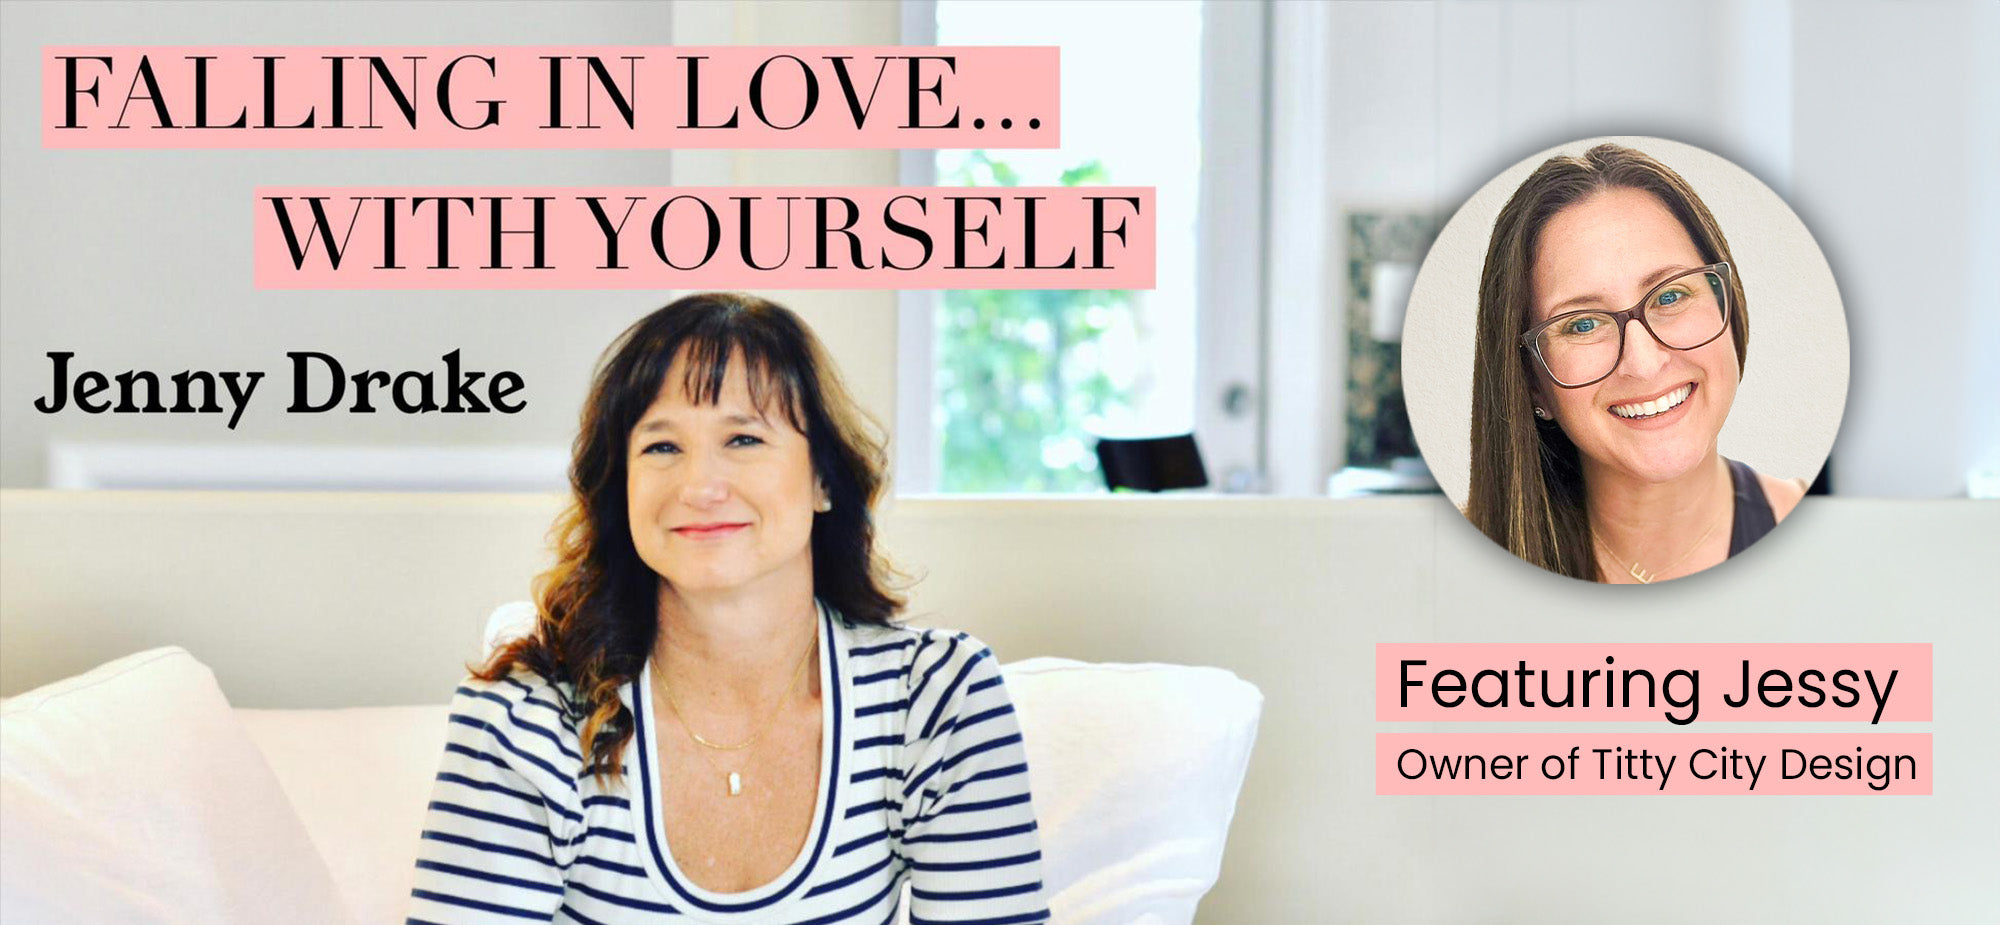 Jenny Drake: Falling in Love with Yourself Podcast featuring Jessy, Founder of Titty City Design